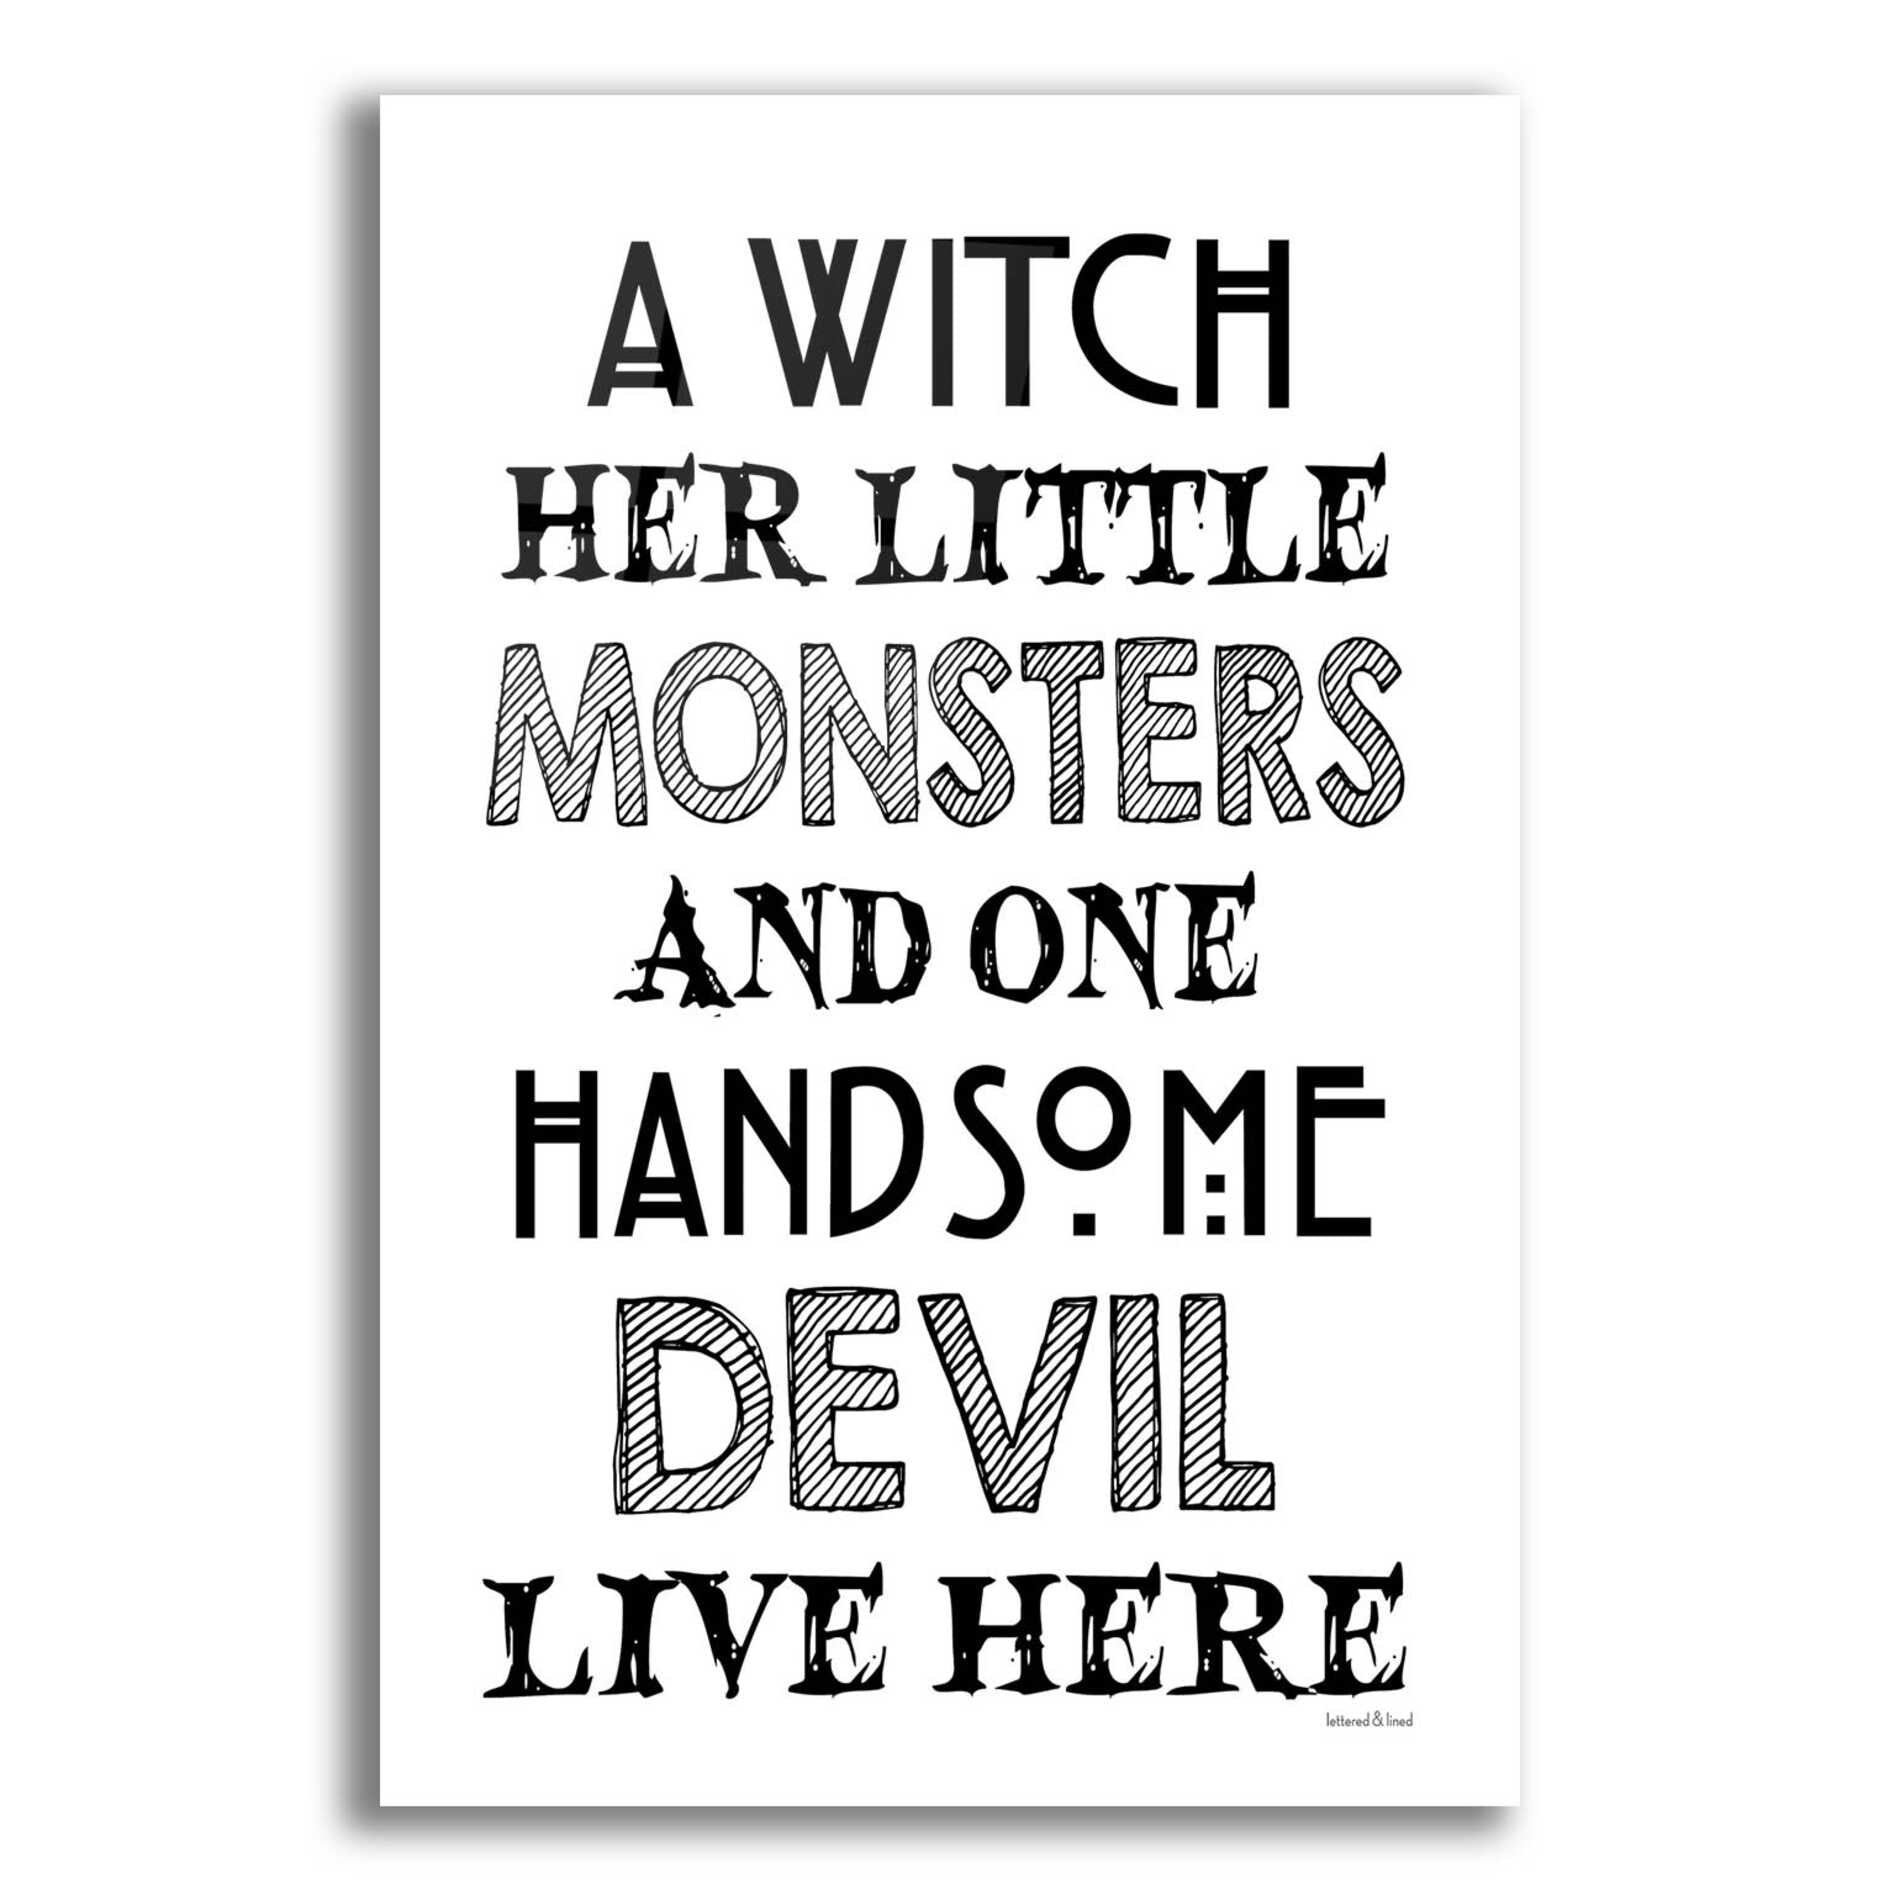 Epic Art 'A Witch' by Lettered & Lined, Acrylic Glass Wall Art